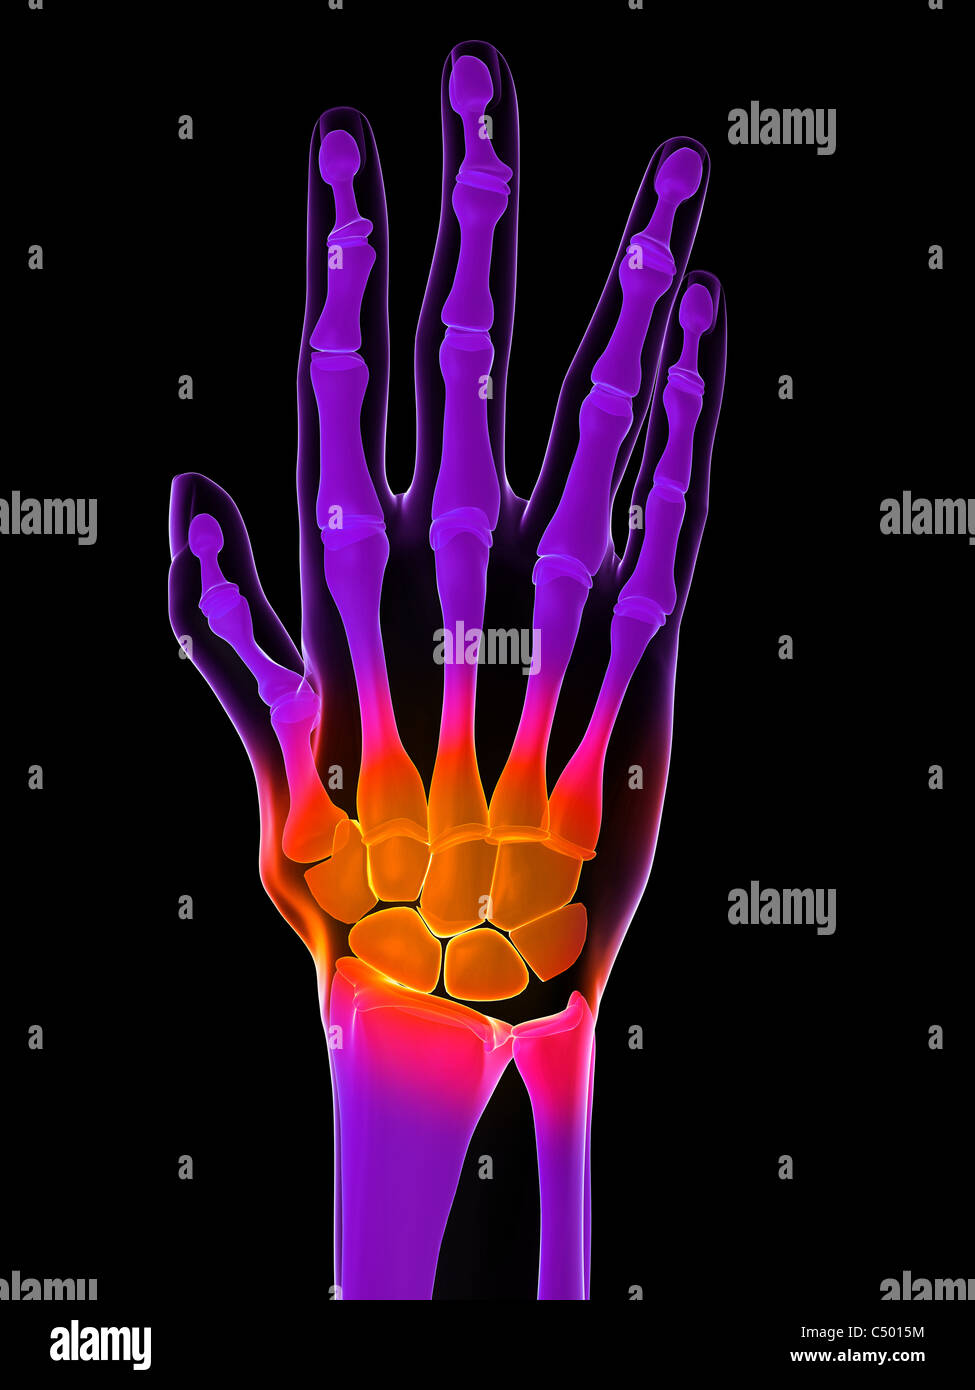 highlighted hand and finger joints Stock Photo